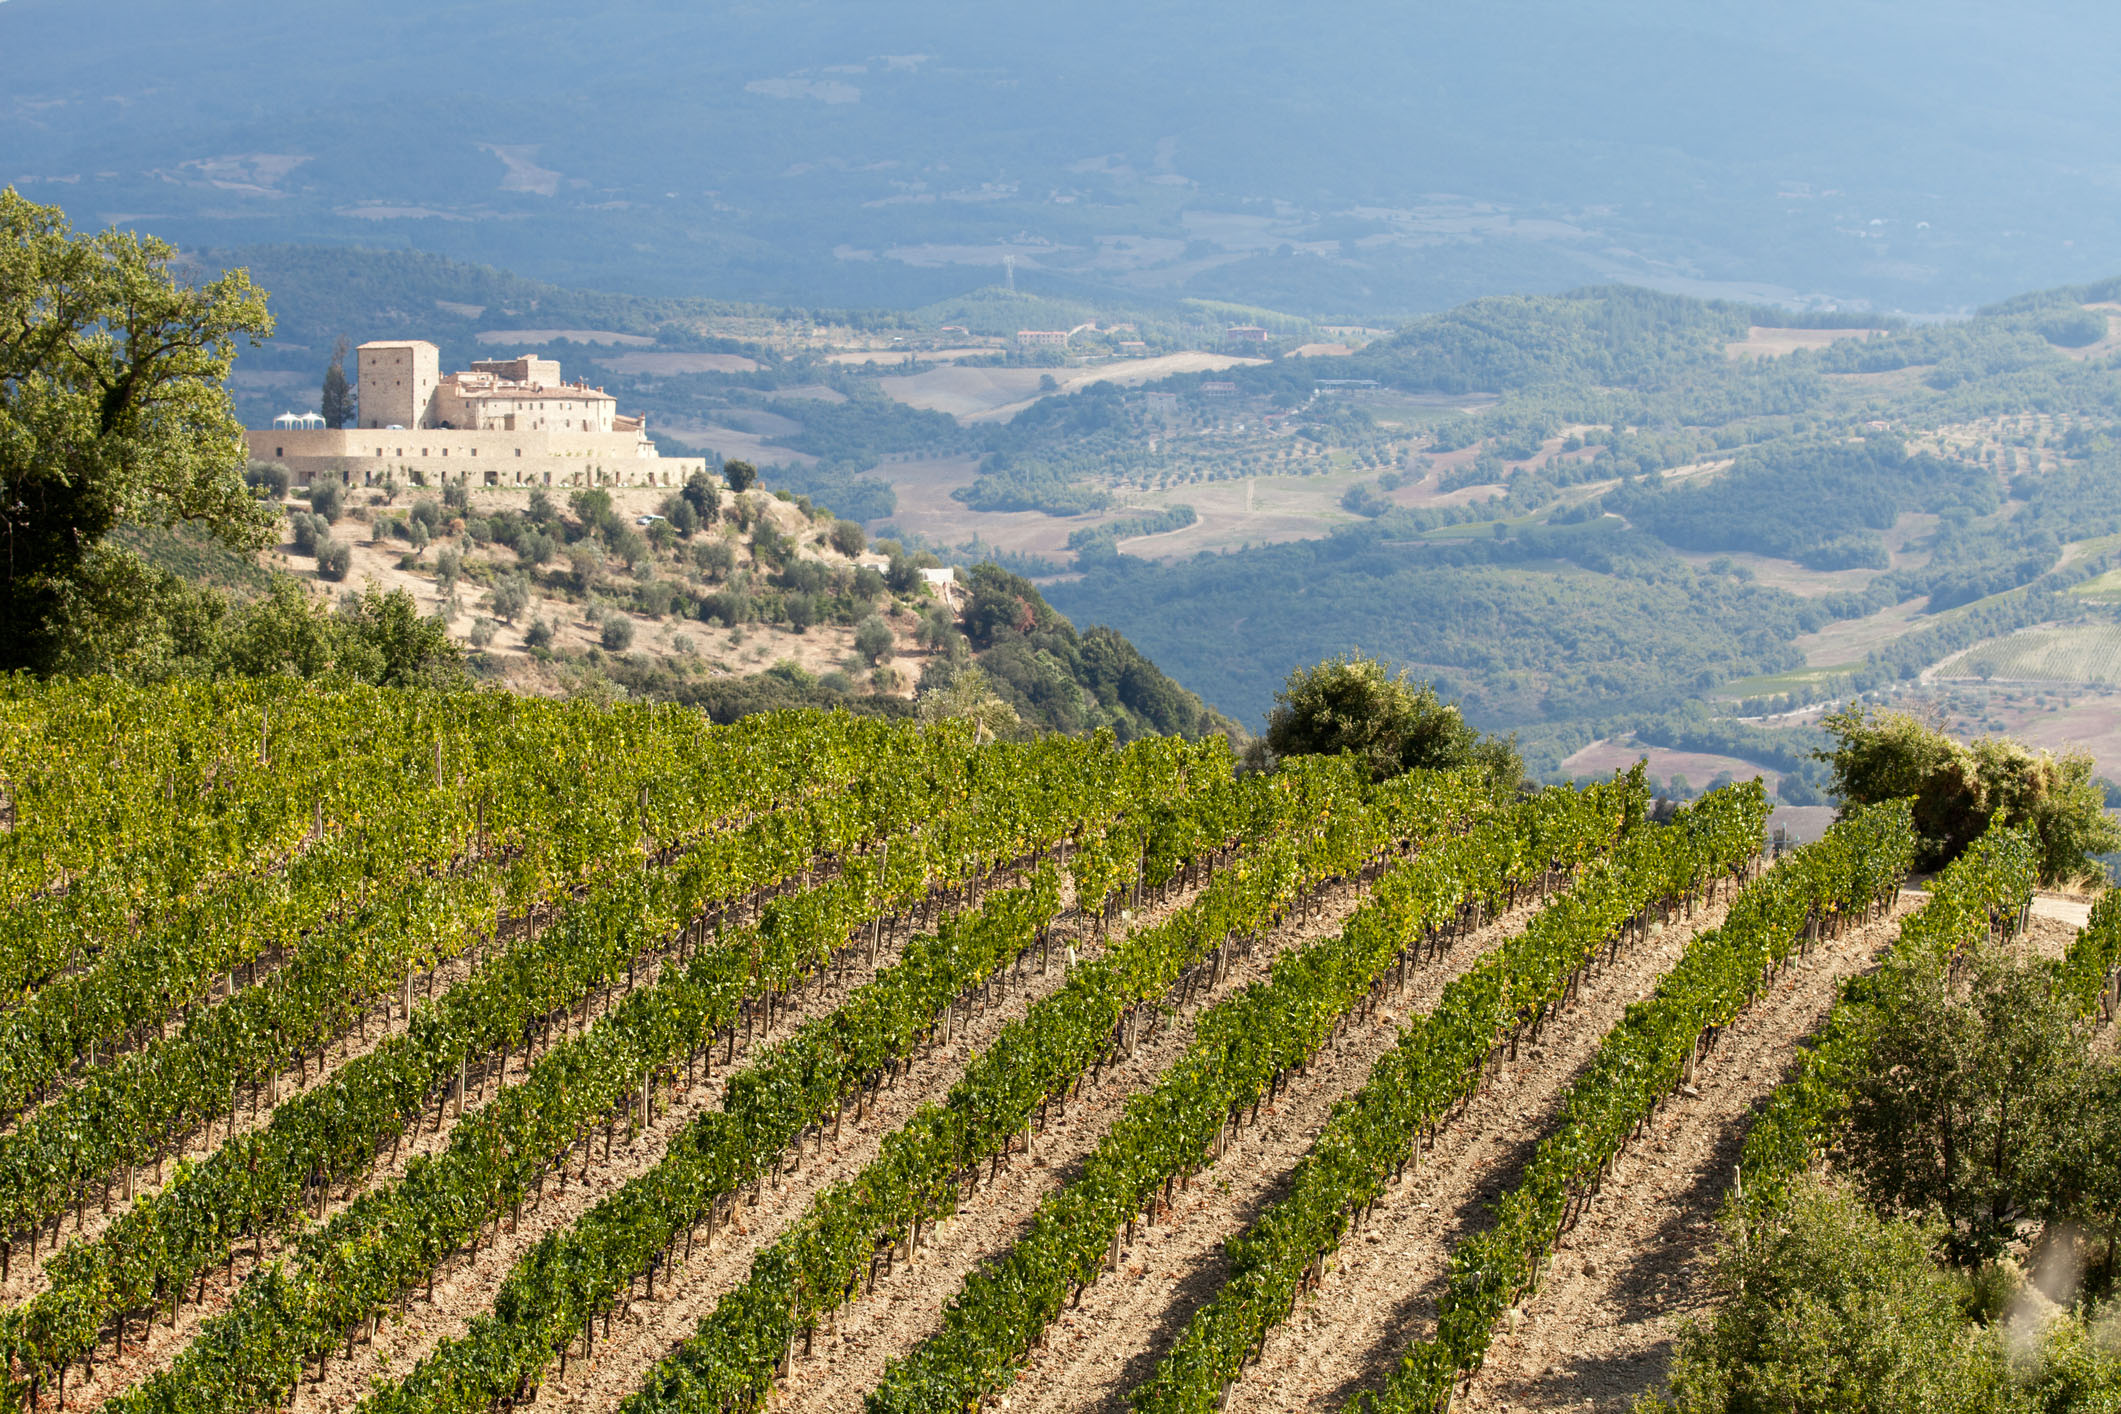 Brunello di Montalcino:  Reflecting Place, Philosophy, Vintage  By Terry Nozick